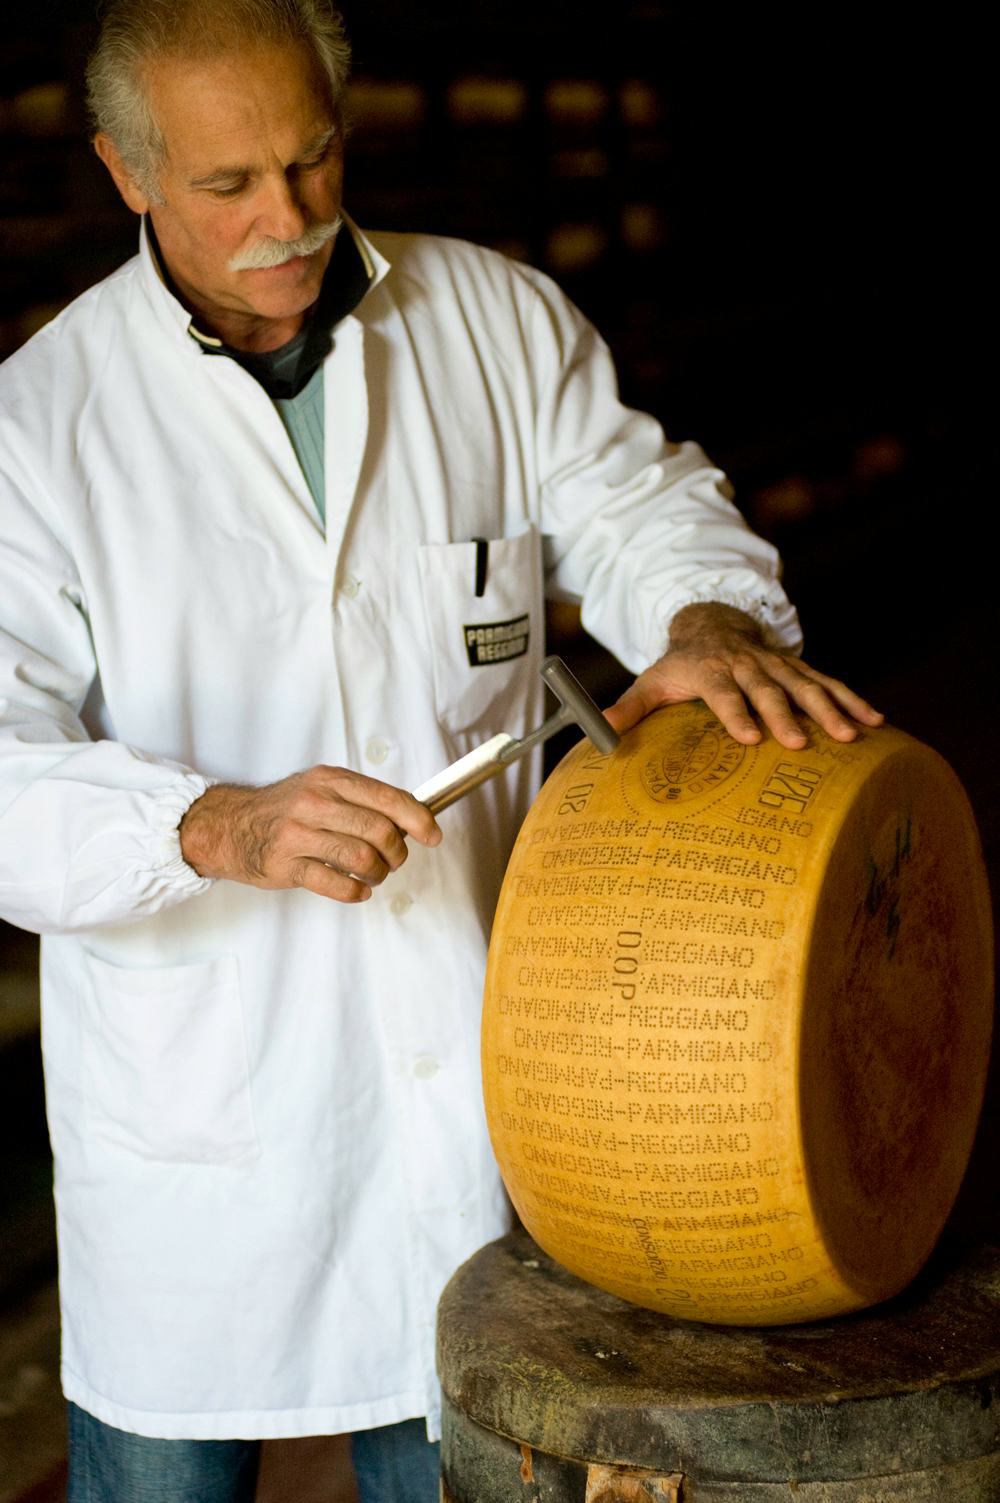 Parmigiano Reggiano cheese maker with cheese